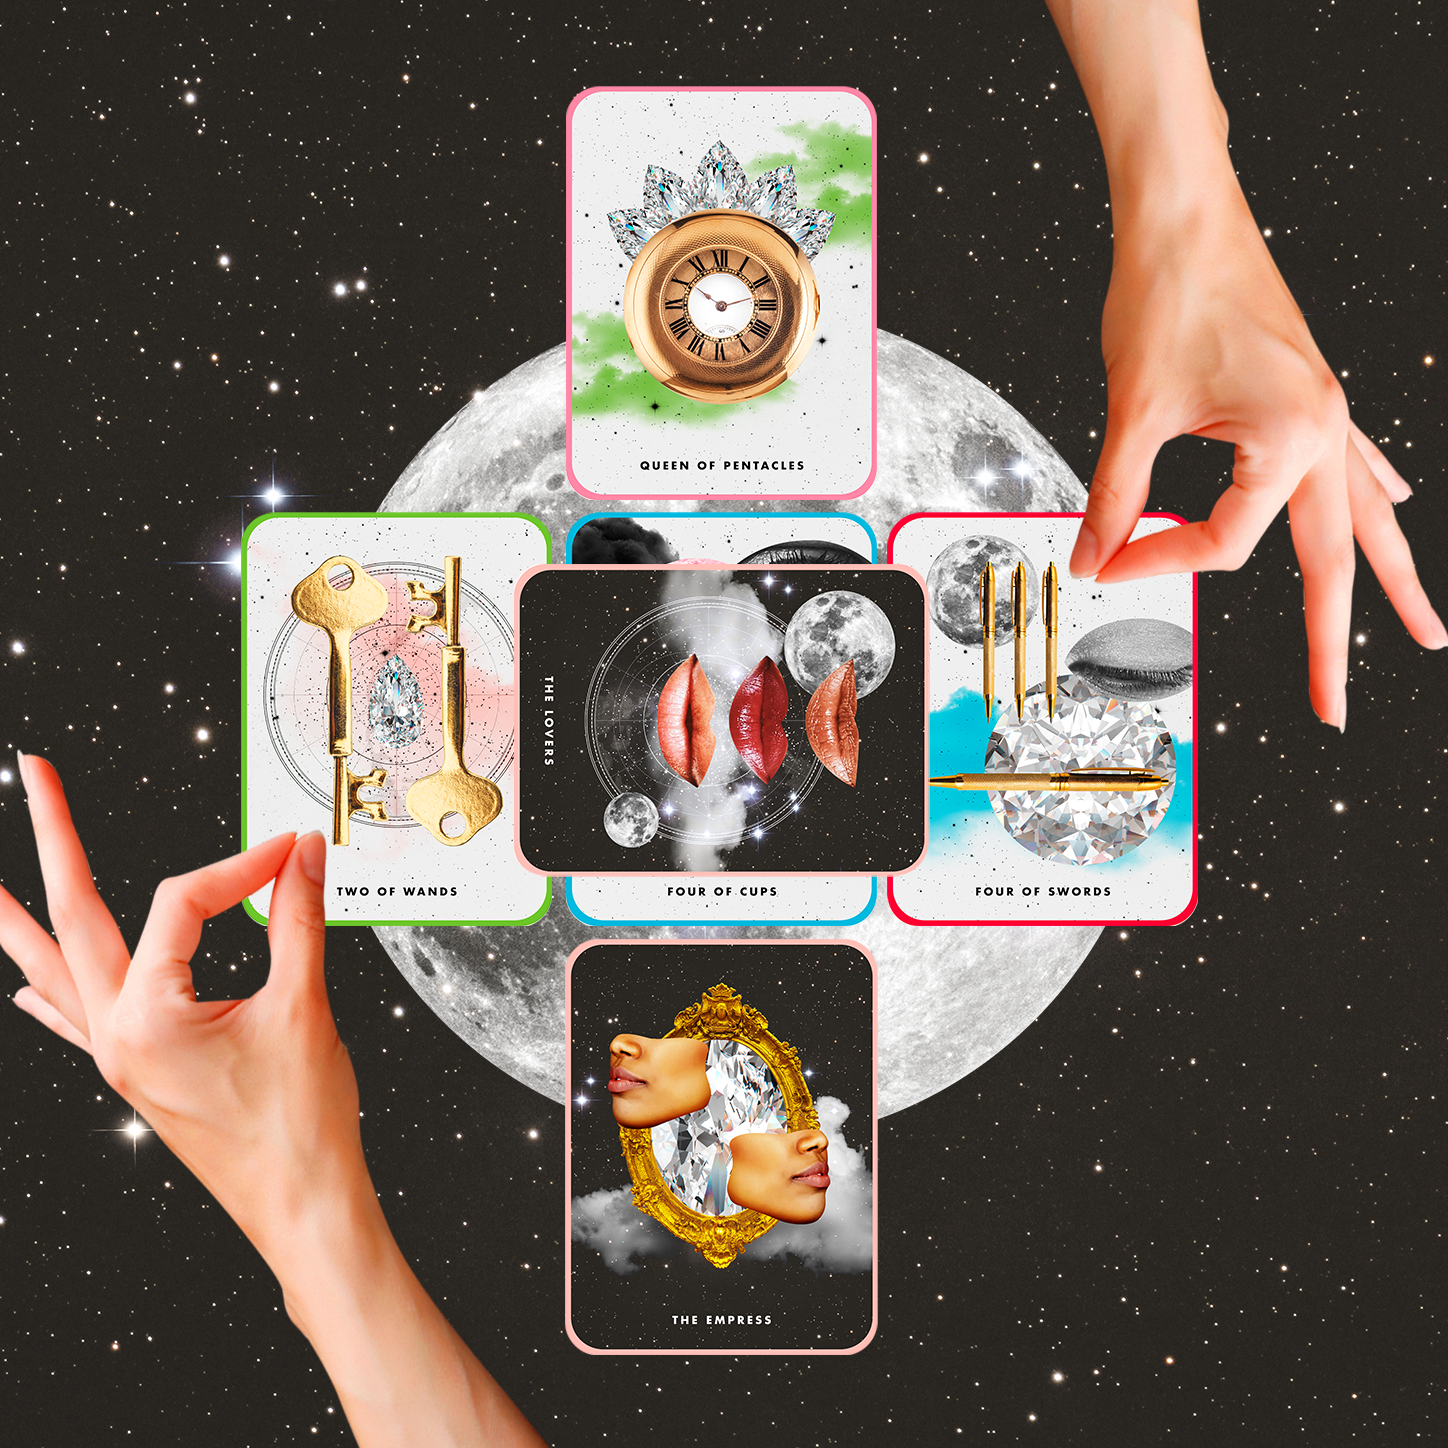 Your Weekly Tarot Card Reading Is Telling You to Stop Doom-Scrolling